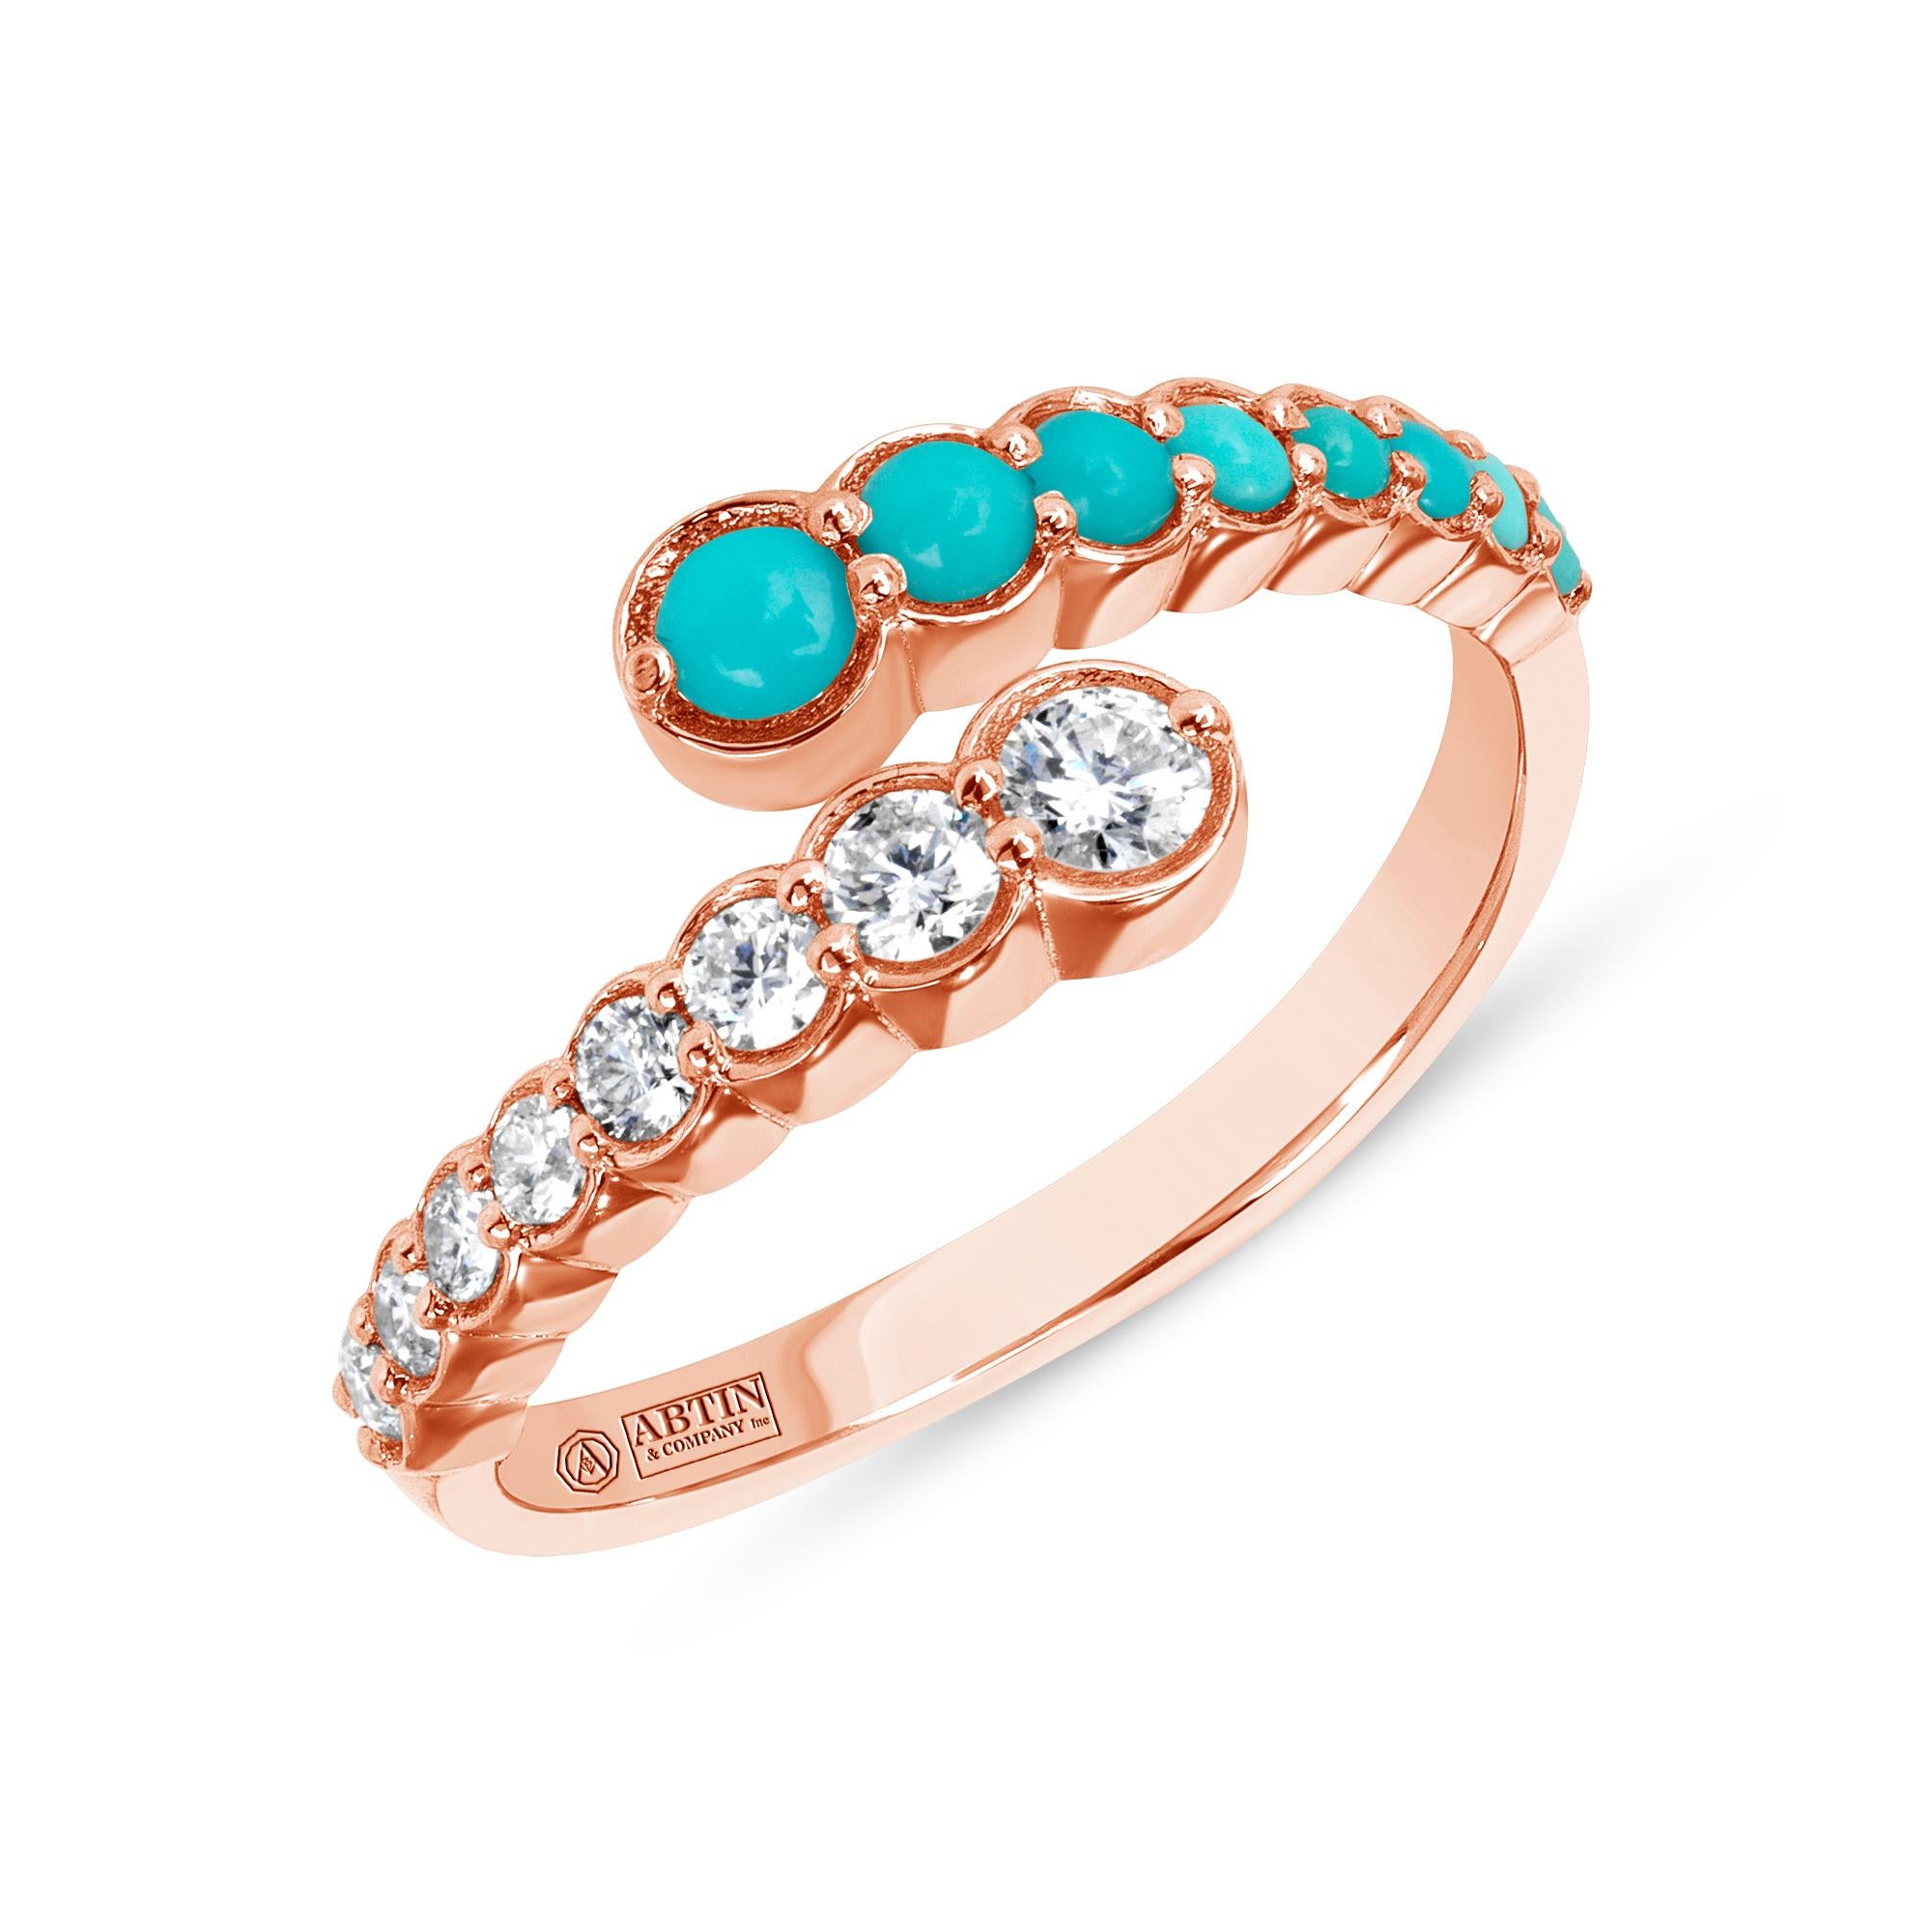 Crafted in 14K gold this ring features clean and contemporary lines. This modern and stylish open bypass ring is set with mesmerizing round-cut 
diamonds and genuine turquoise. Stack it with your stacking rings or wear it solo to elevate any